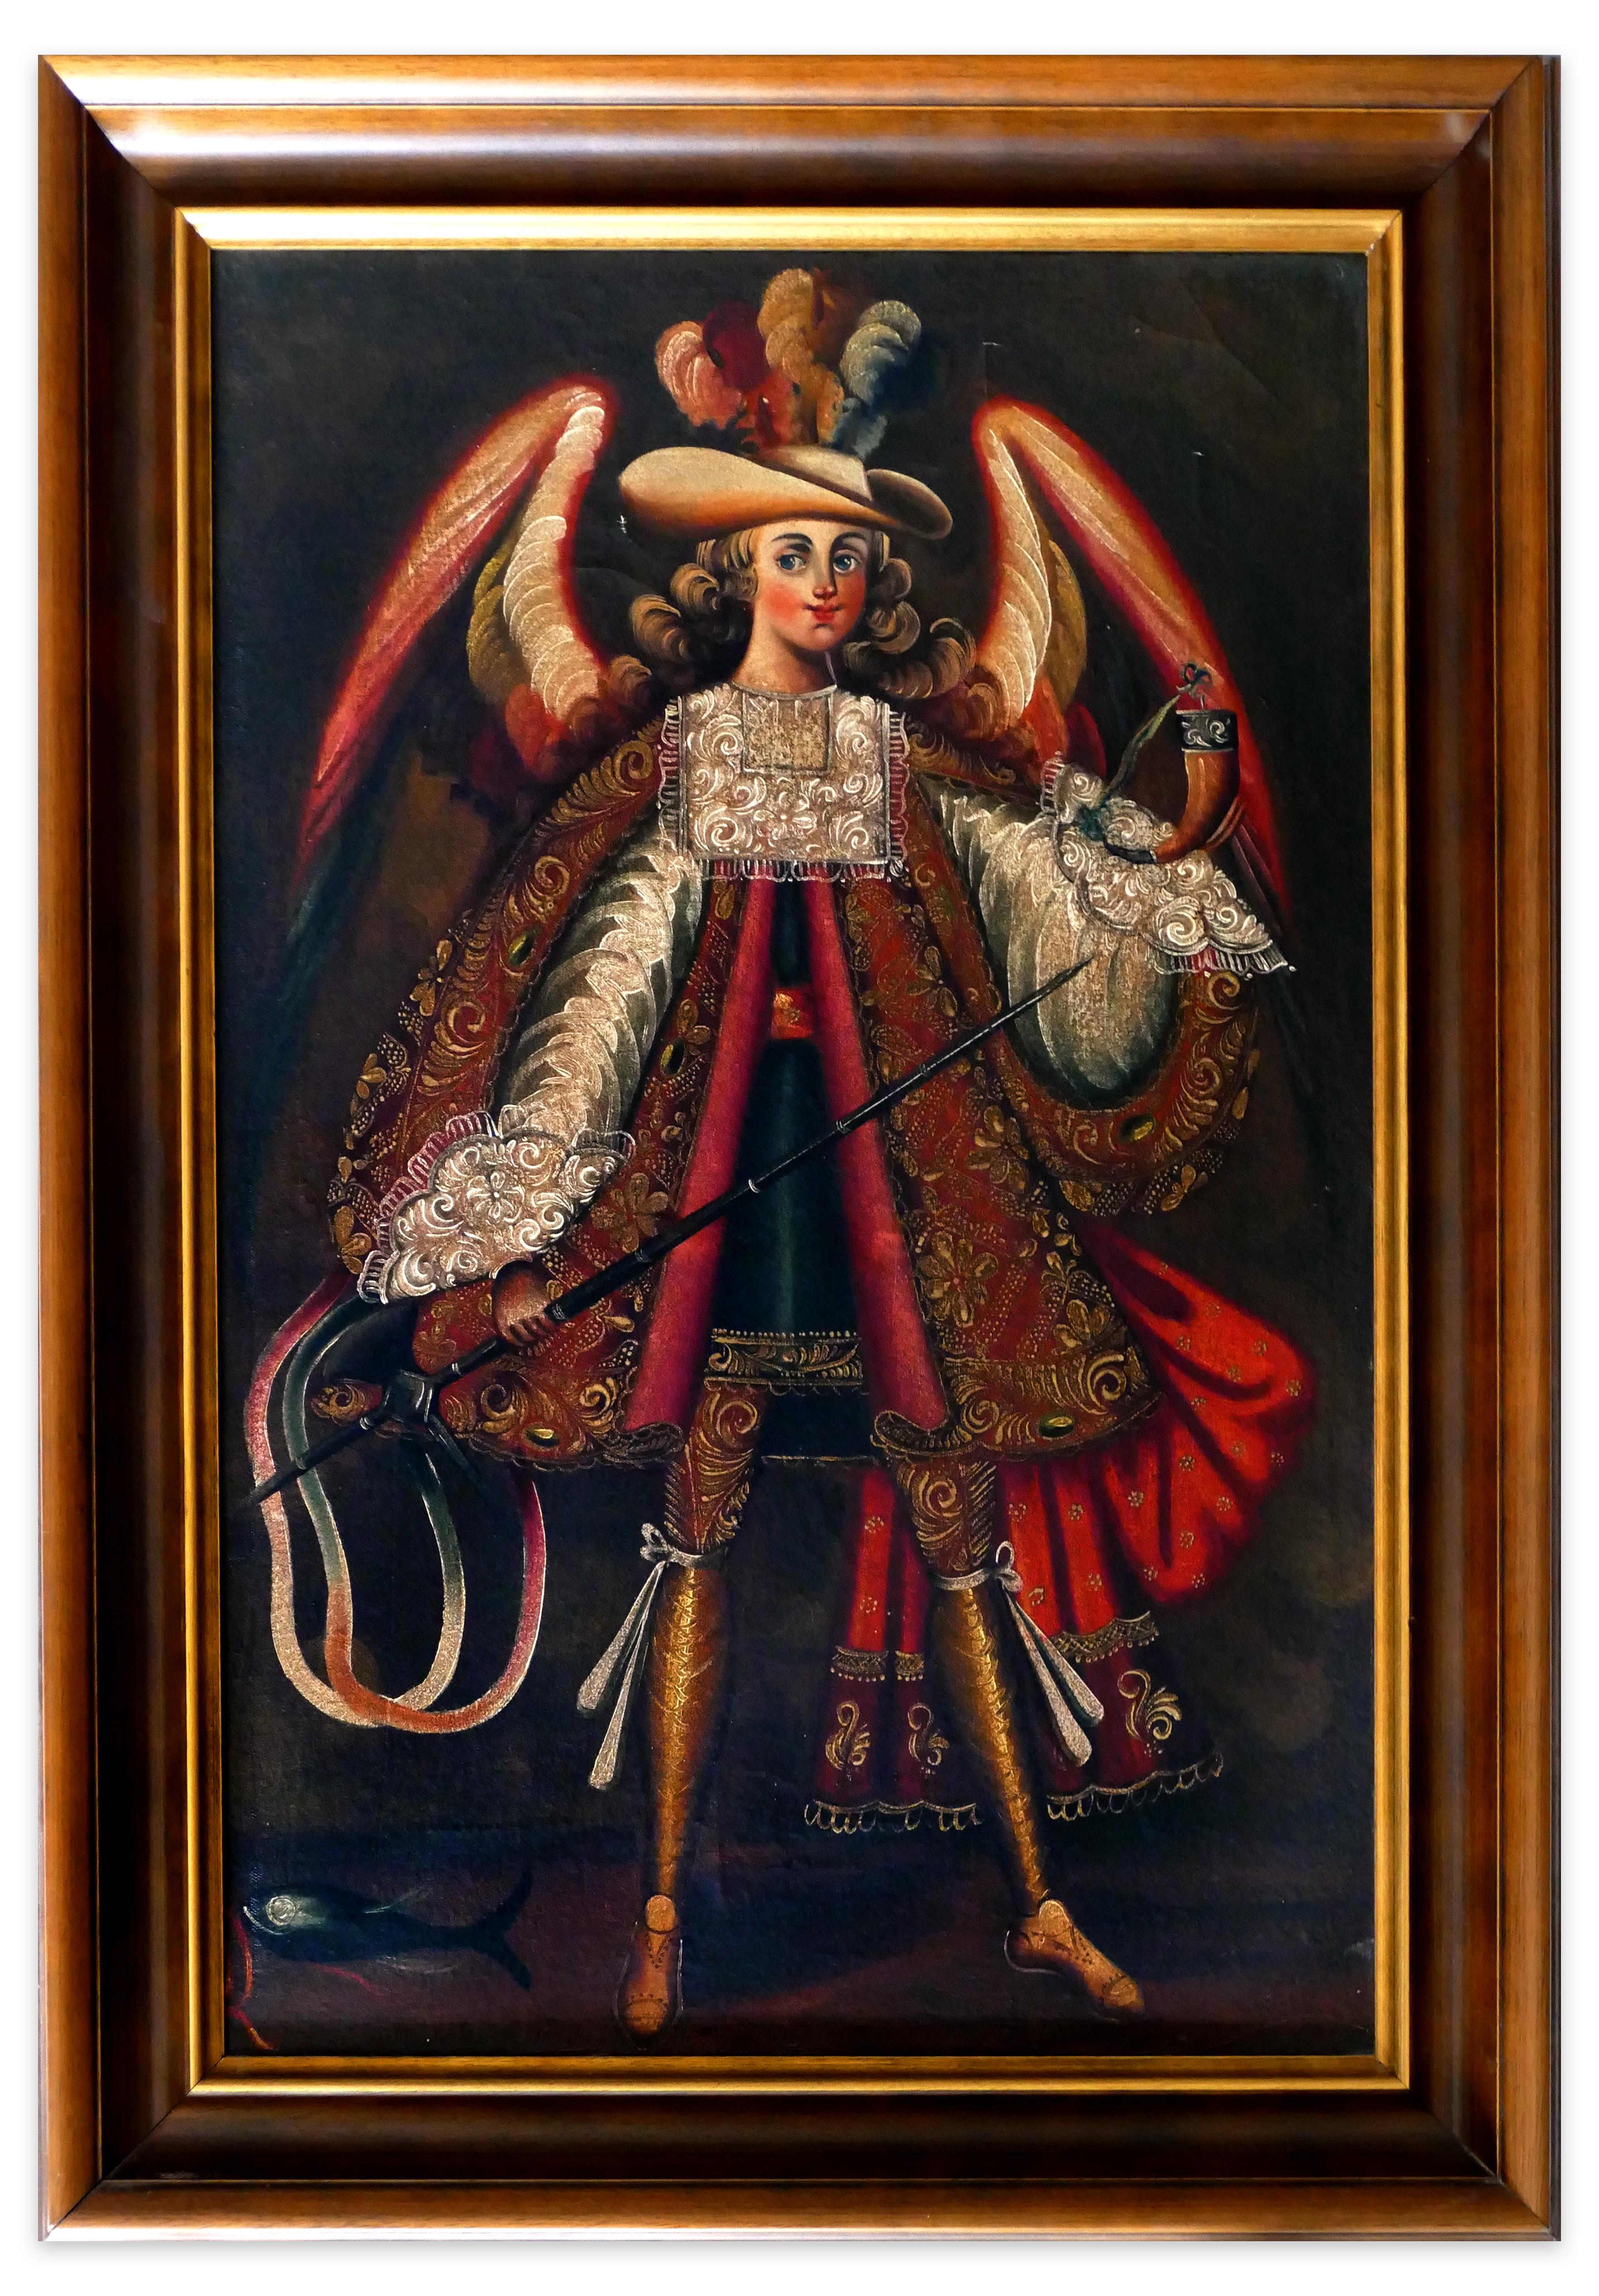 Unknown Figurative Painting - Collection of 5 Paintings of South-American Angels - Spanish School End of 1800